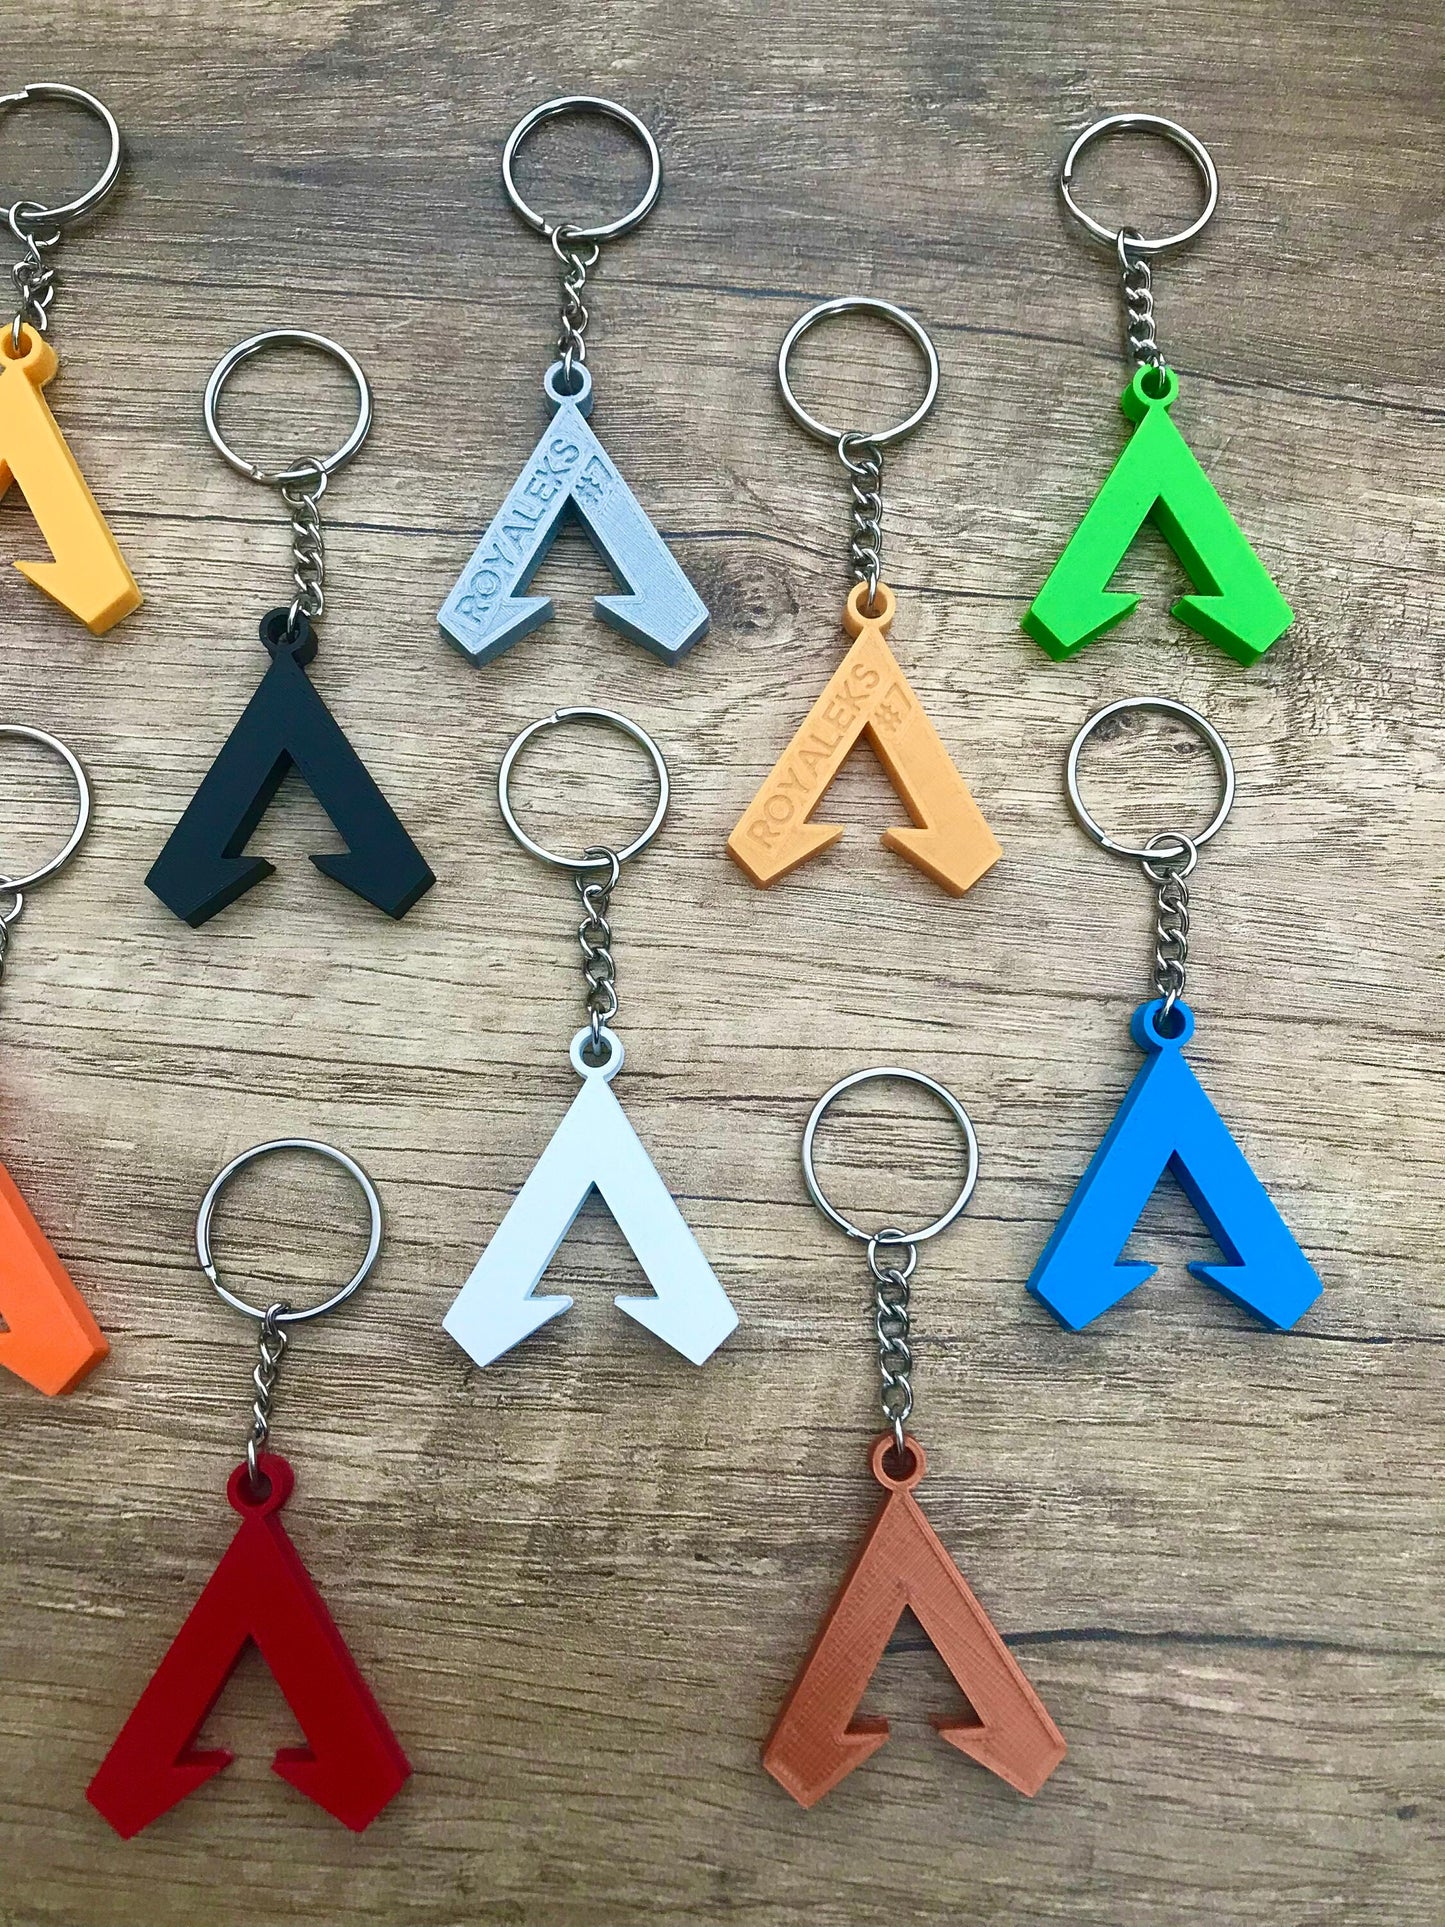 Apex Legends Keychain Logo Customizable | 3D printing - FREE SHIPPING